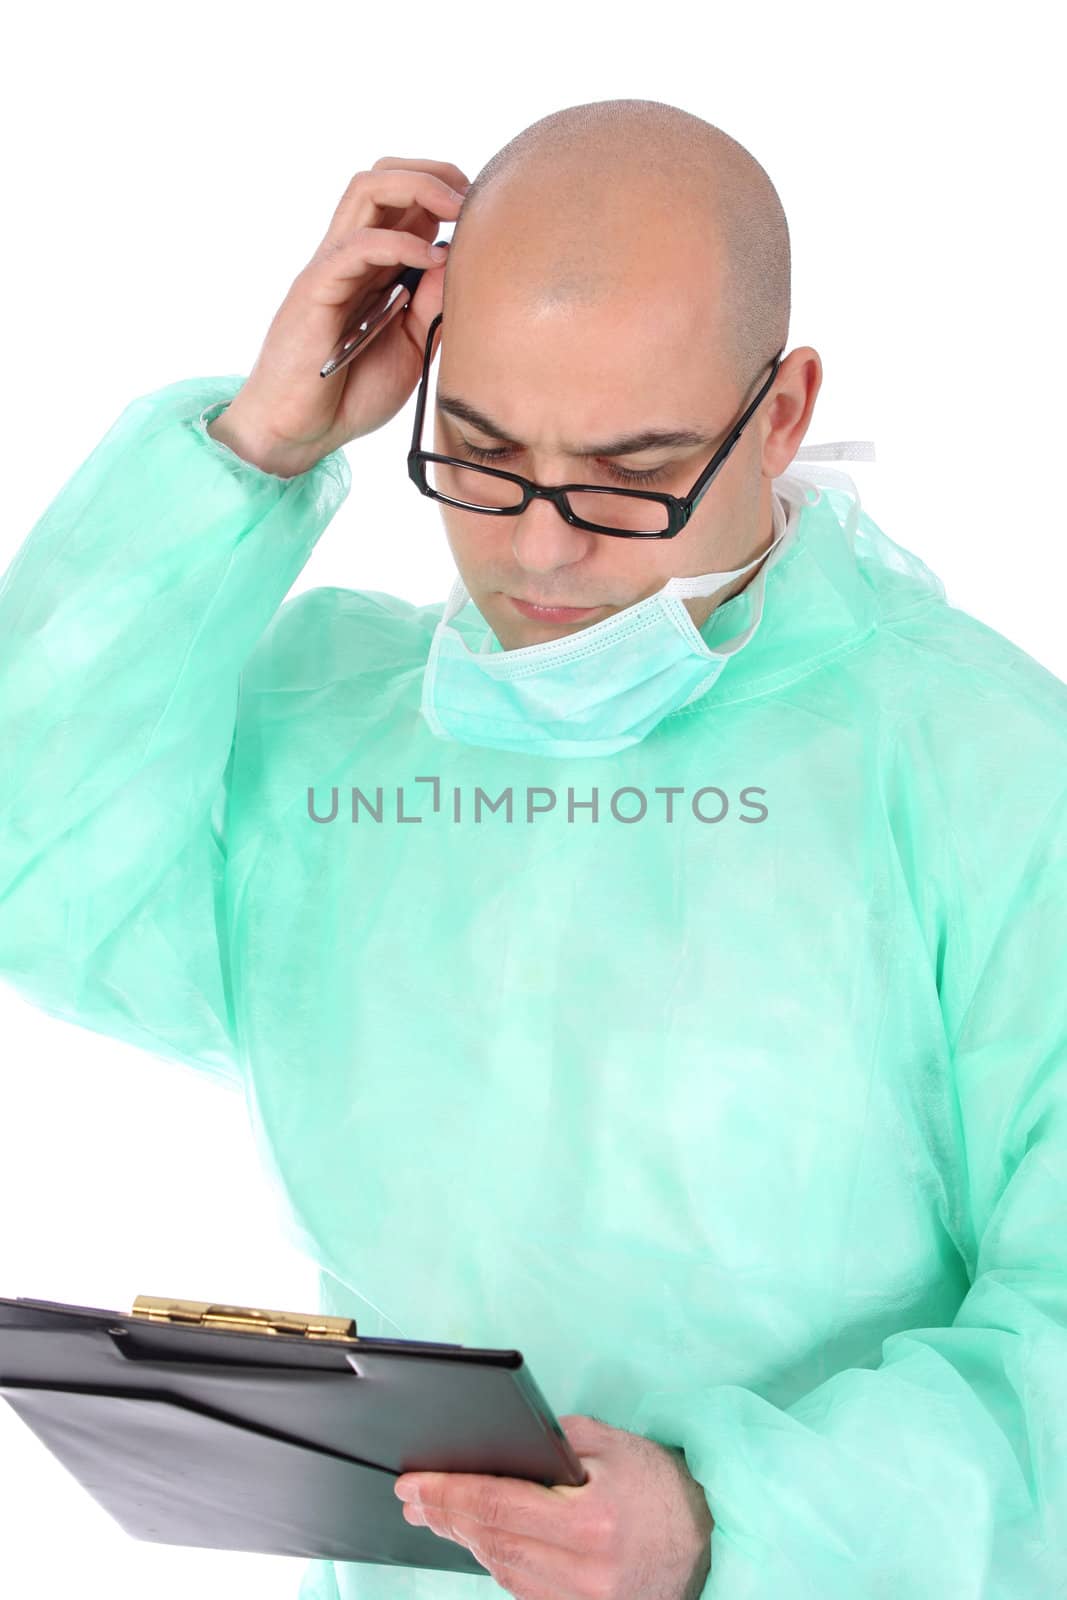 Details an surgeon thinking with documents and pencil